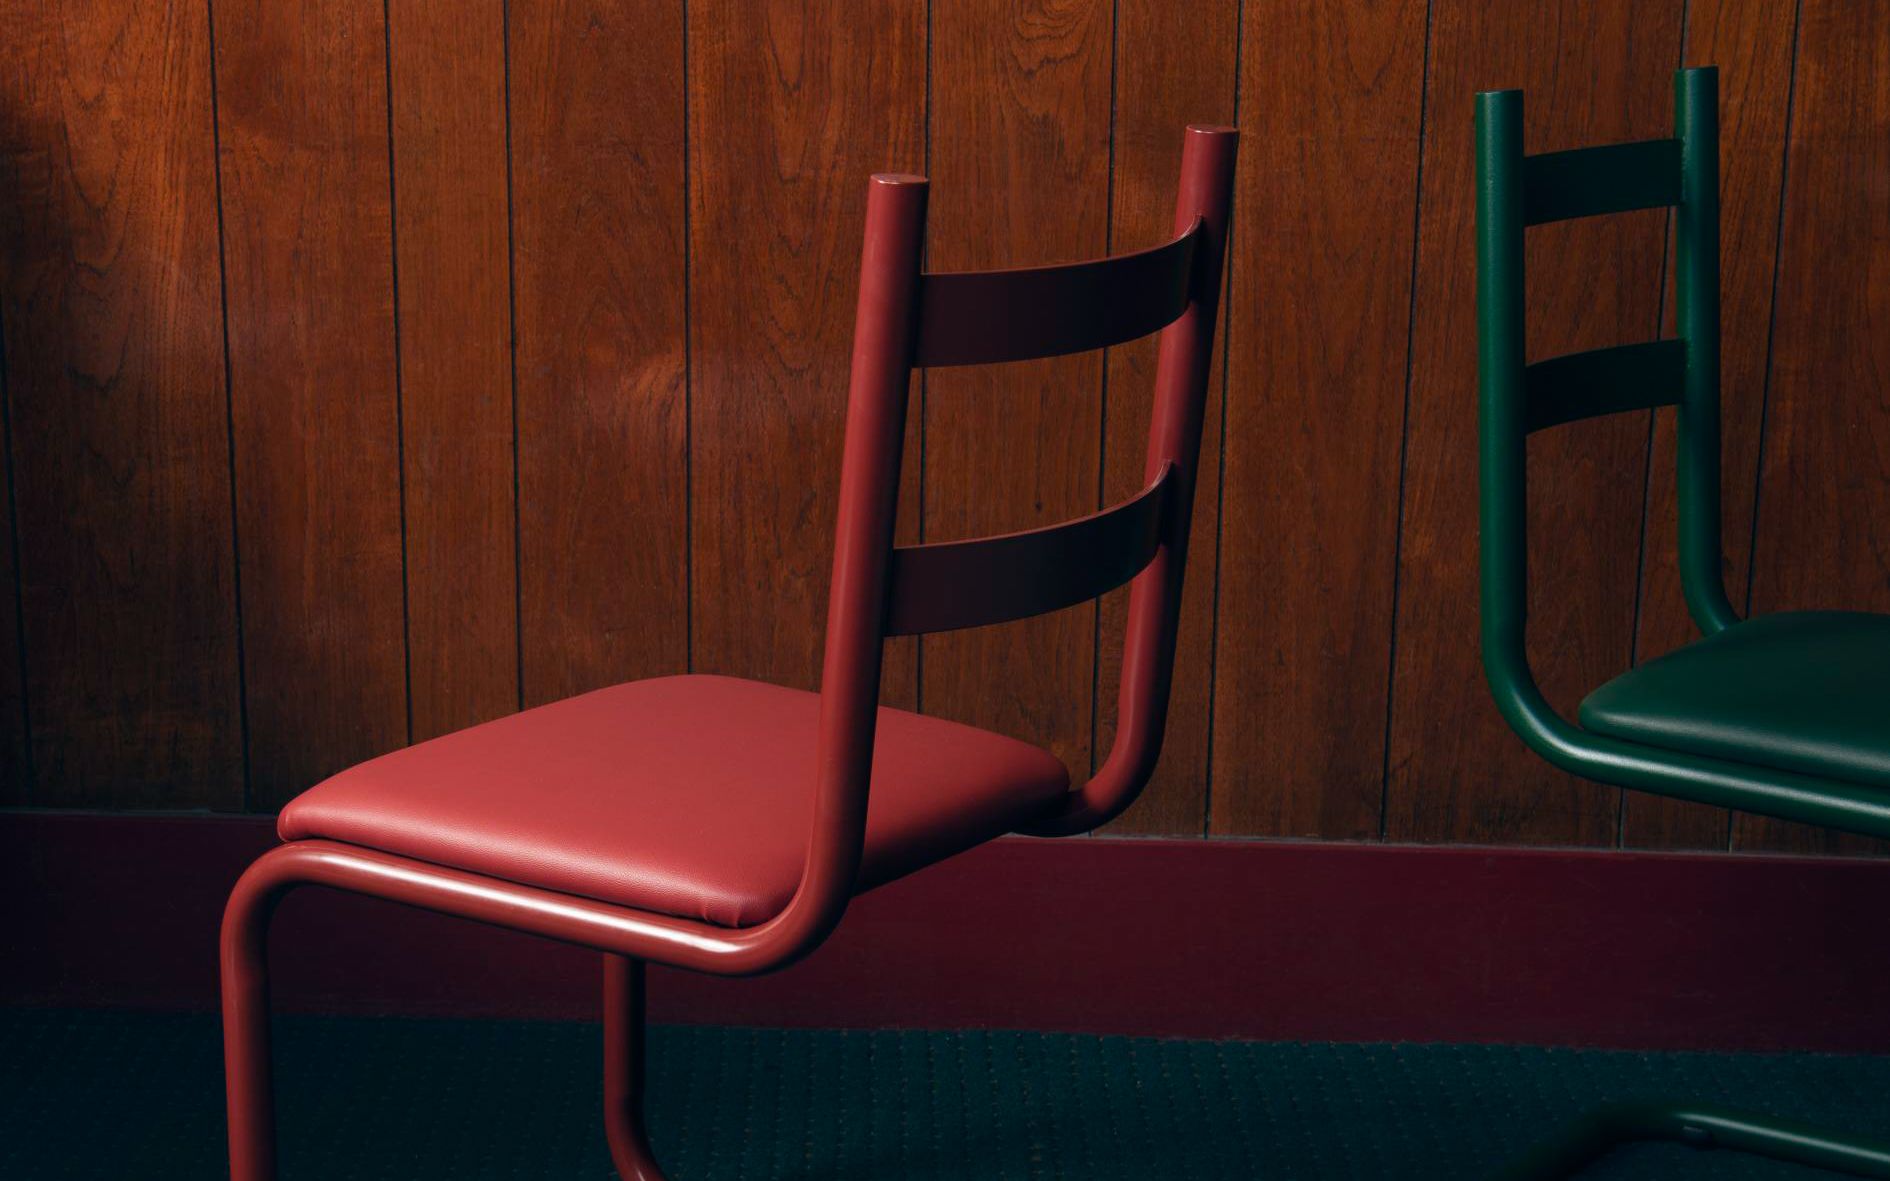 Red and green steel chairs against dark wood panel background